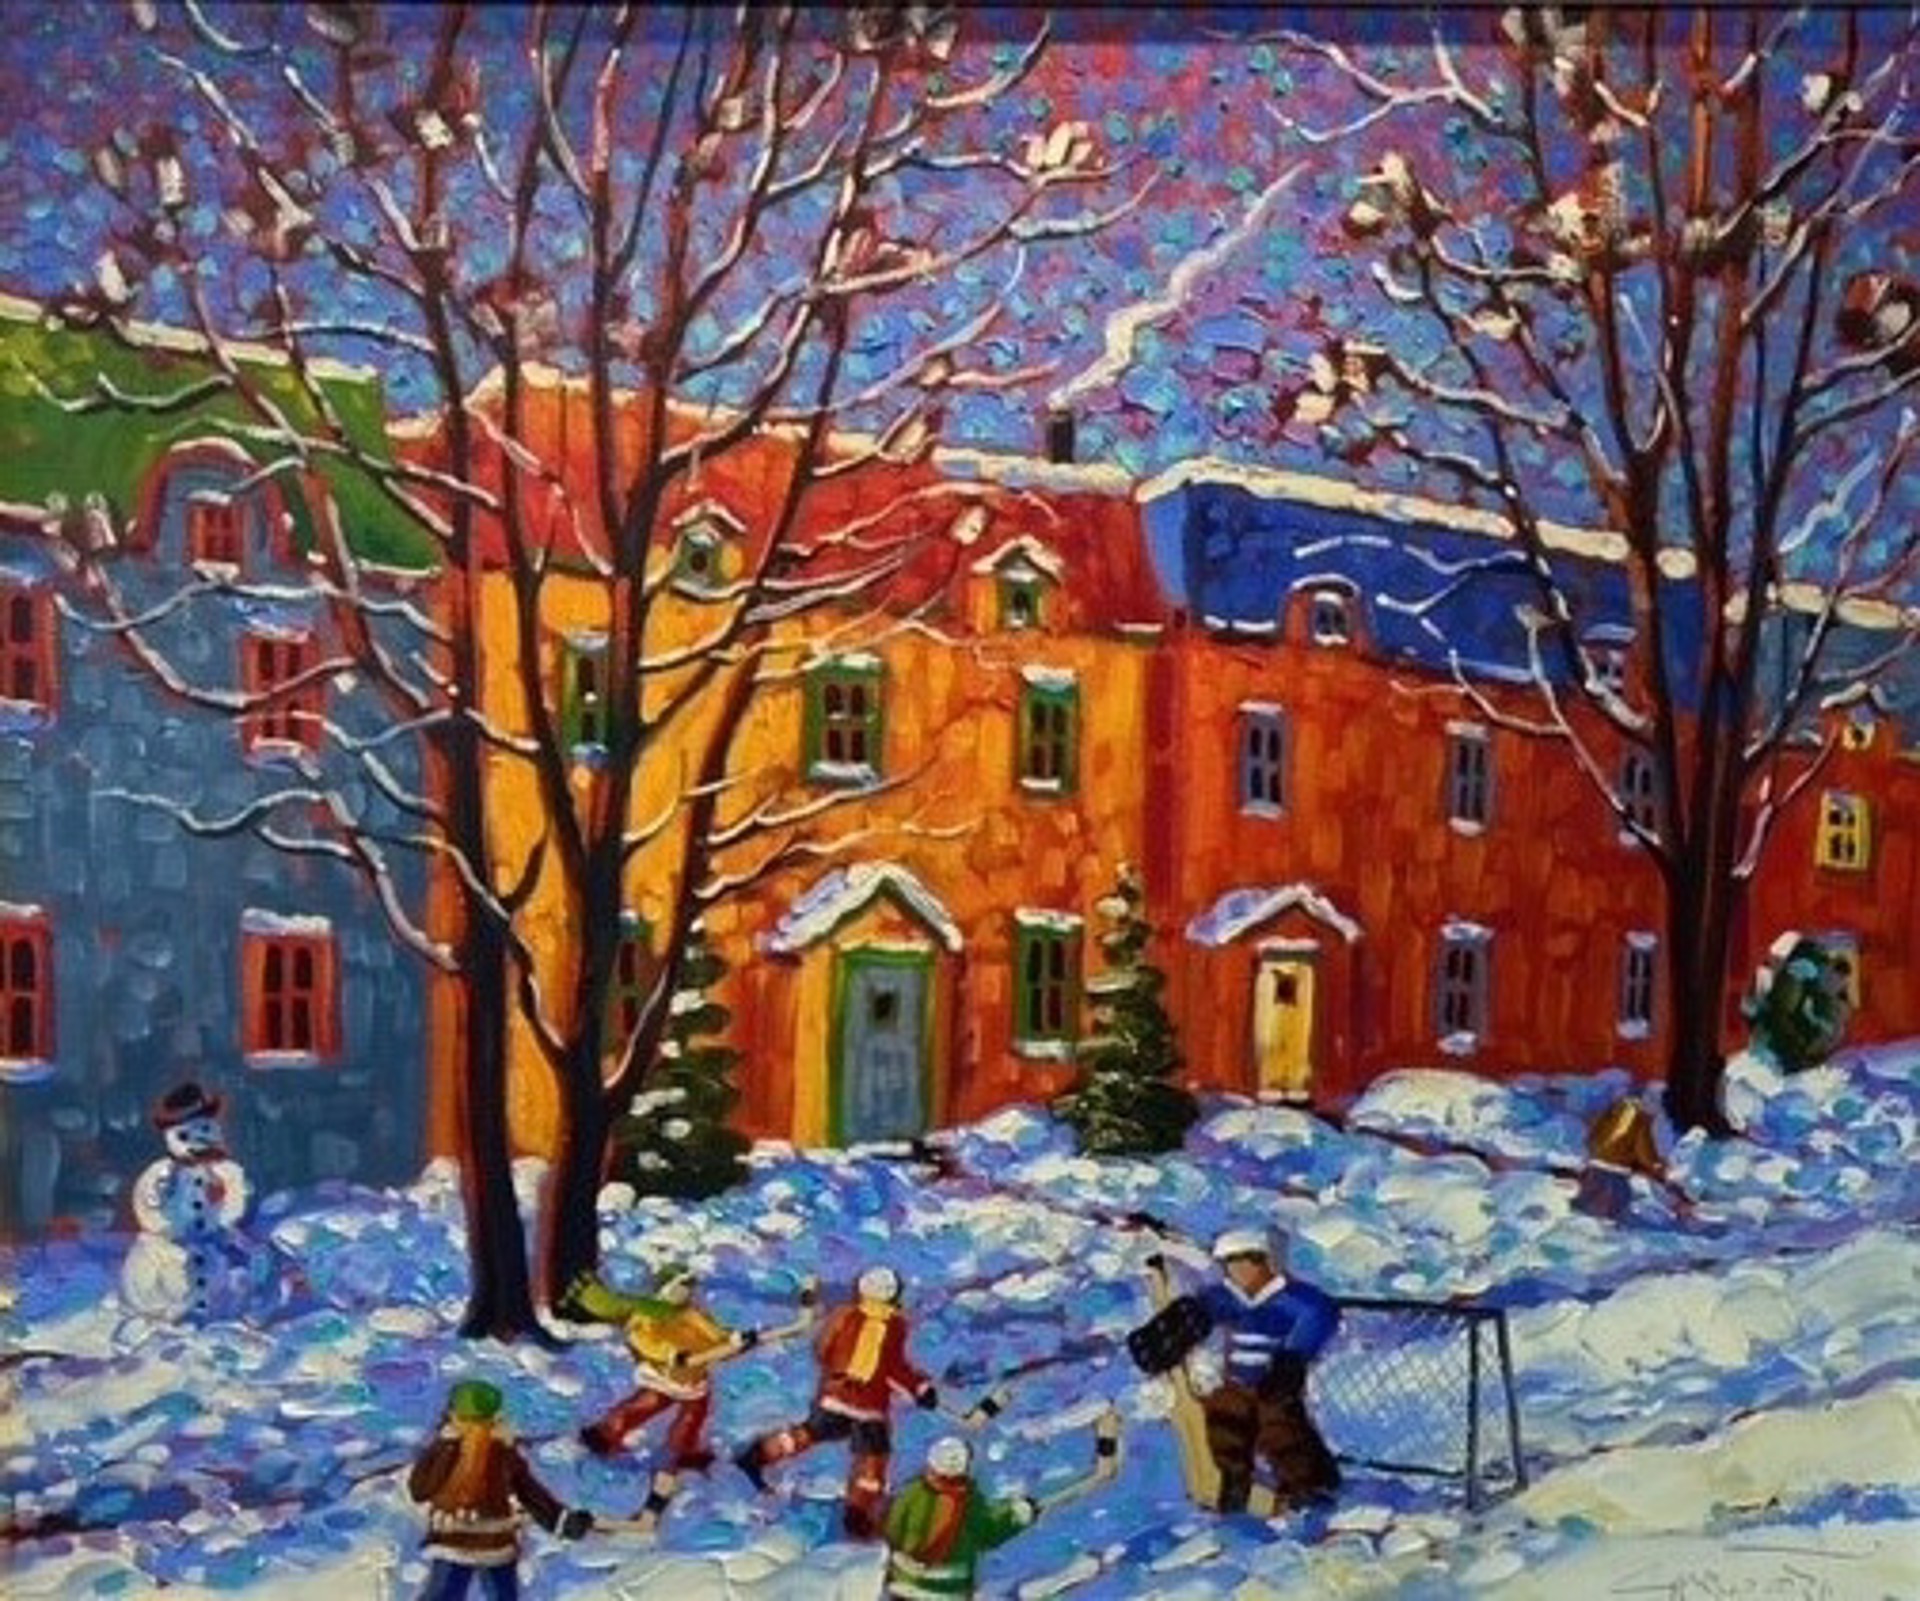 Rod Charlesworth - After A December Snowfall by HISTORICAL ART